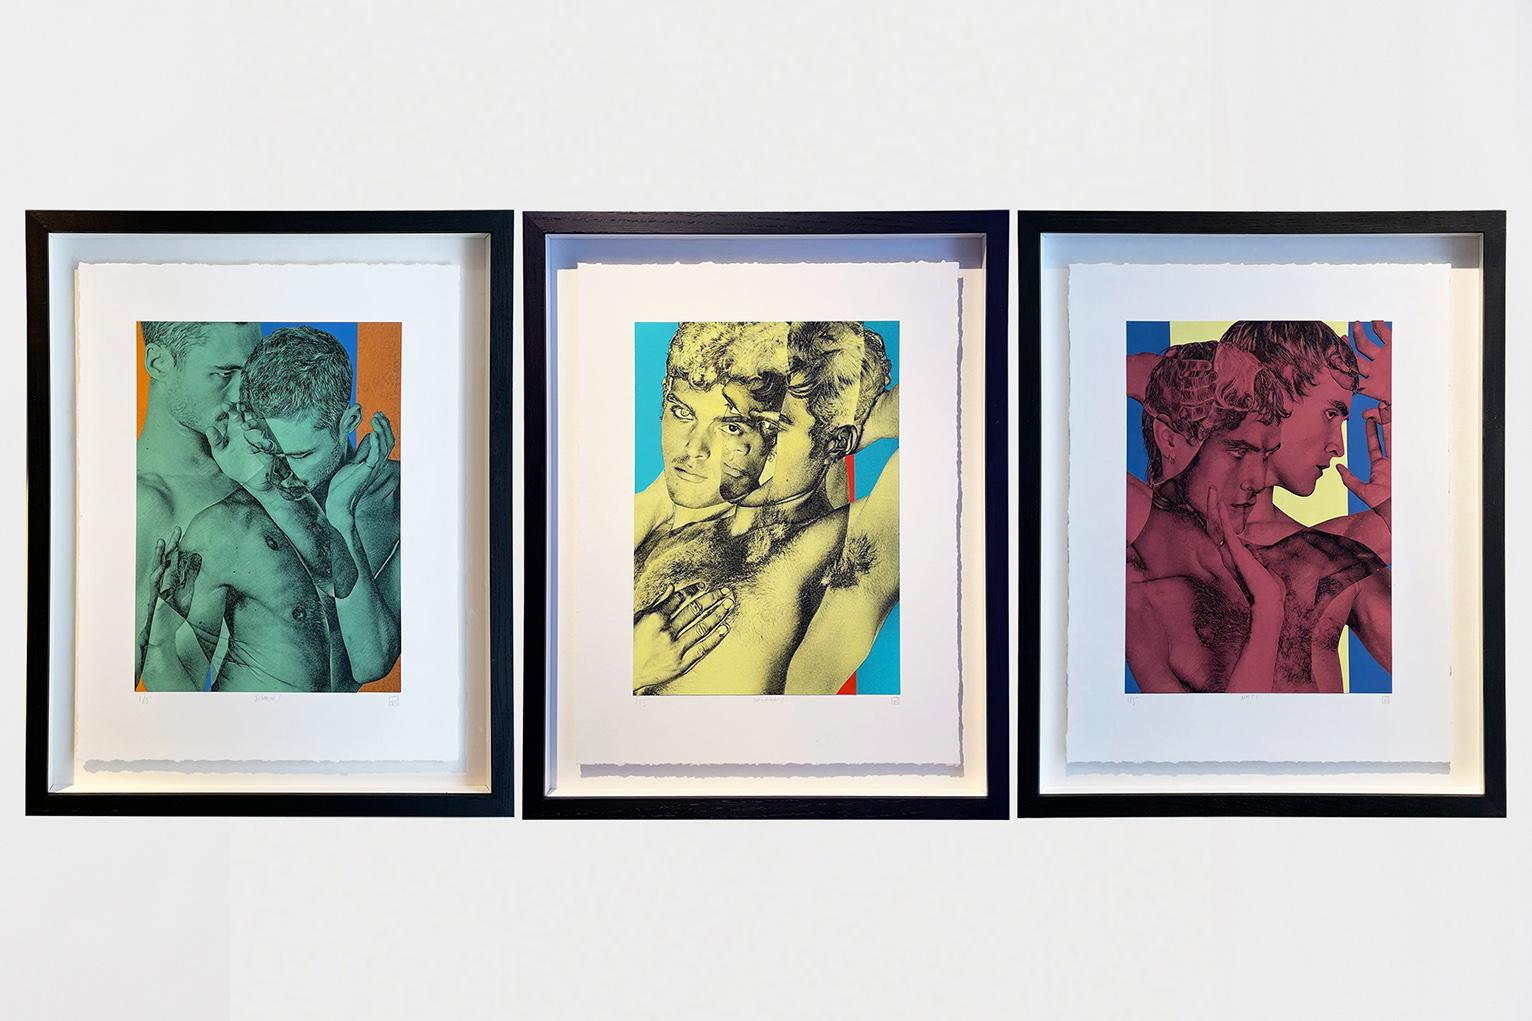 A triptych by Radek Husak.
Transfered pigments, collage, paint, soft pastel, carbon, colour pencils on Japanese Tosa Washi paper mounted on watercolour paper. 
Edition 1/5. Framed.
Monogrammed by the artist, 2021.